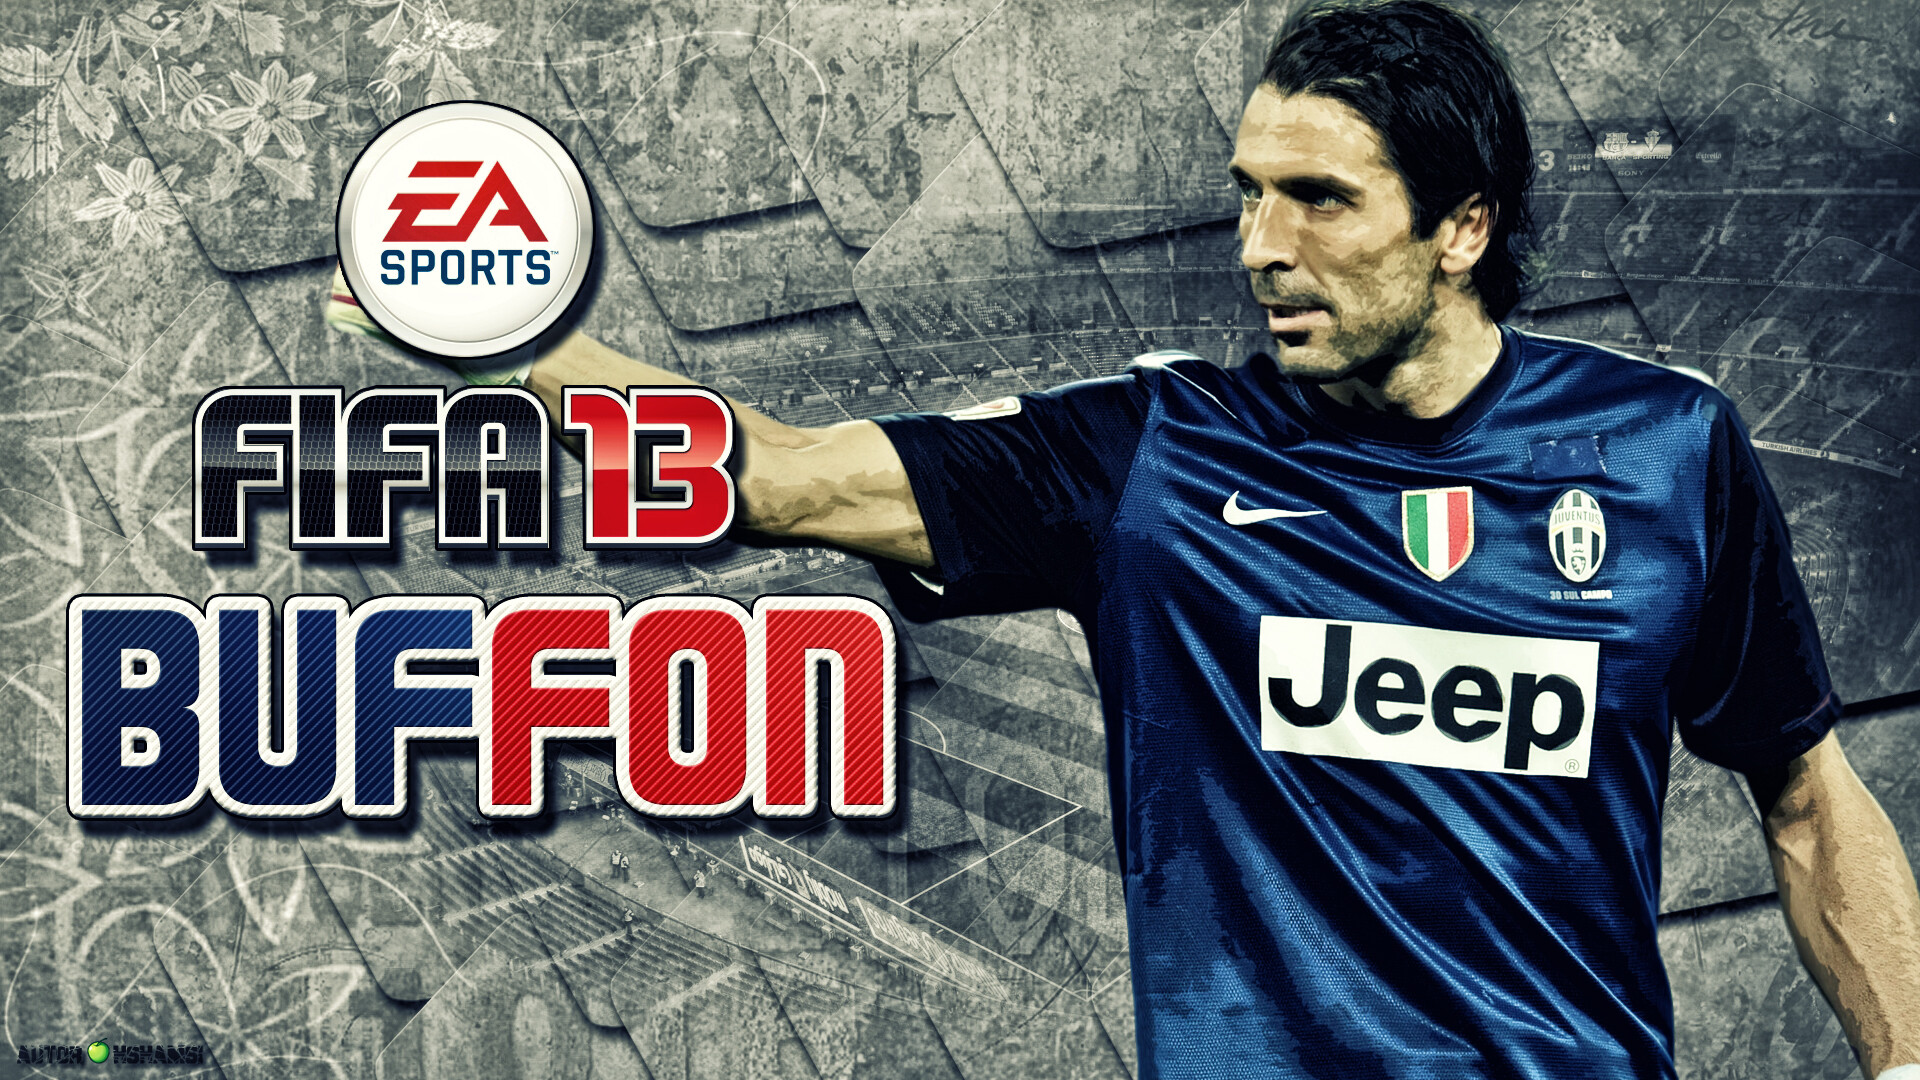 Gianluigi Buffon: FIFA 13, A football simulation video game published by Electronic Arts worldwide under the EA Sports label. 1920x1080 Full HD Background.